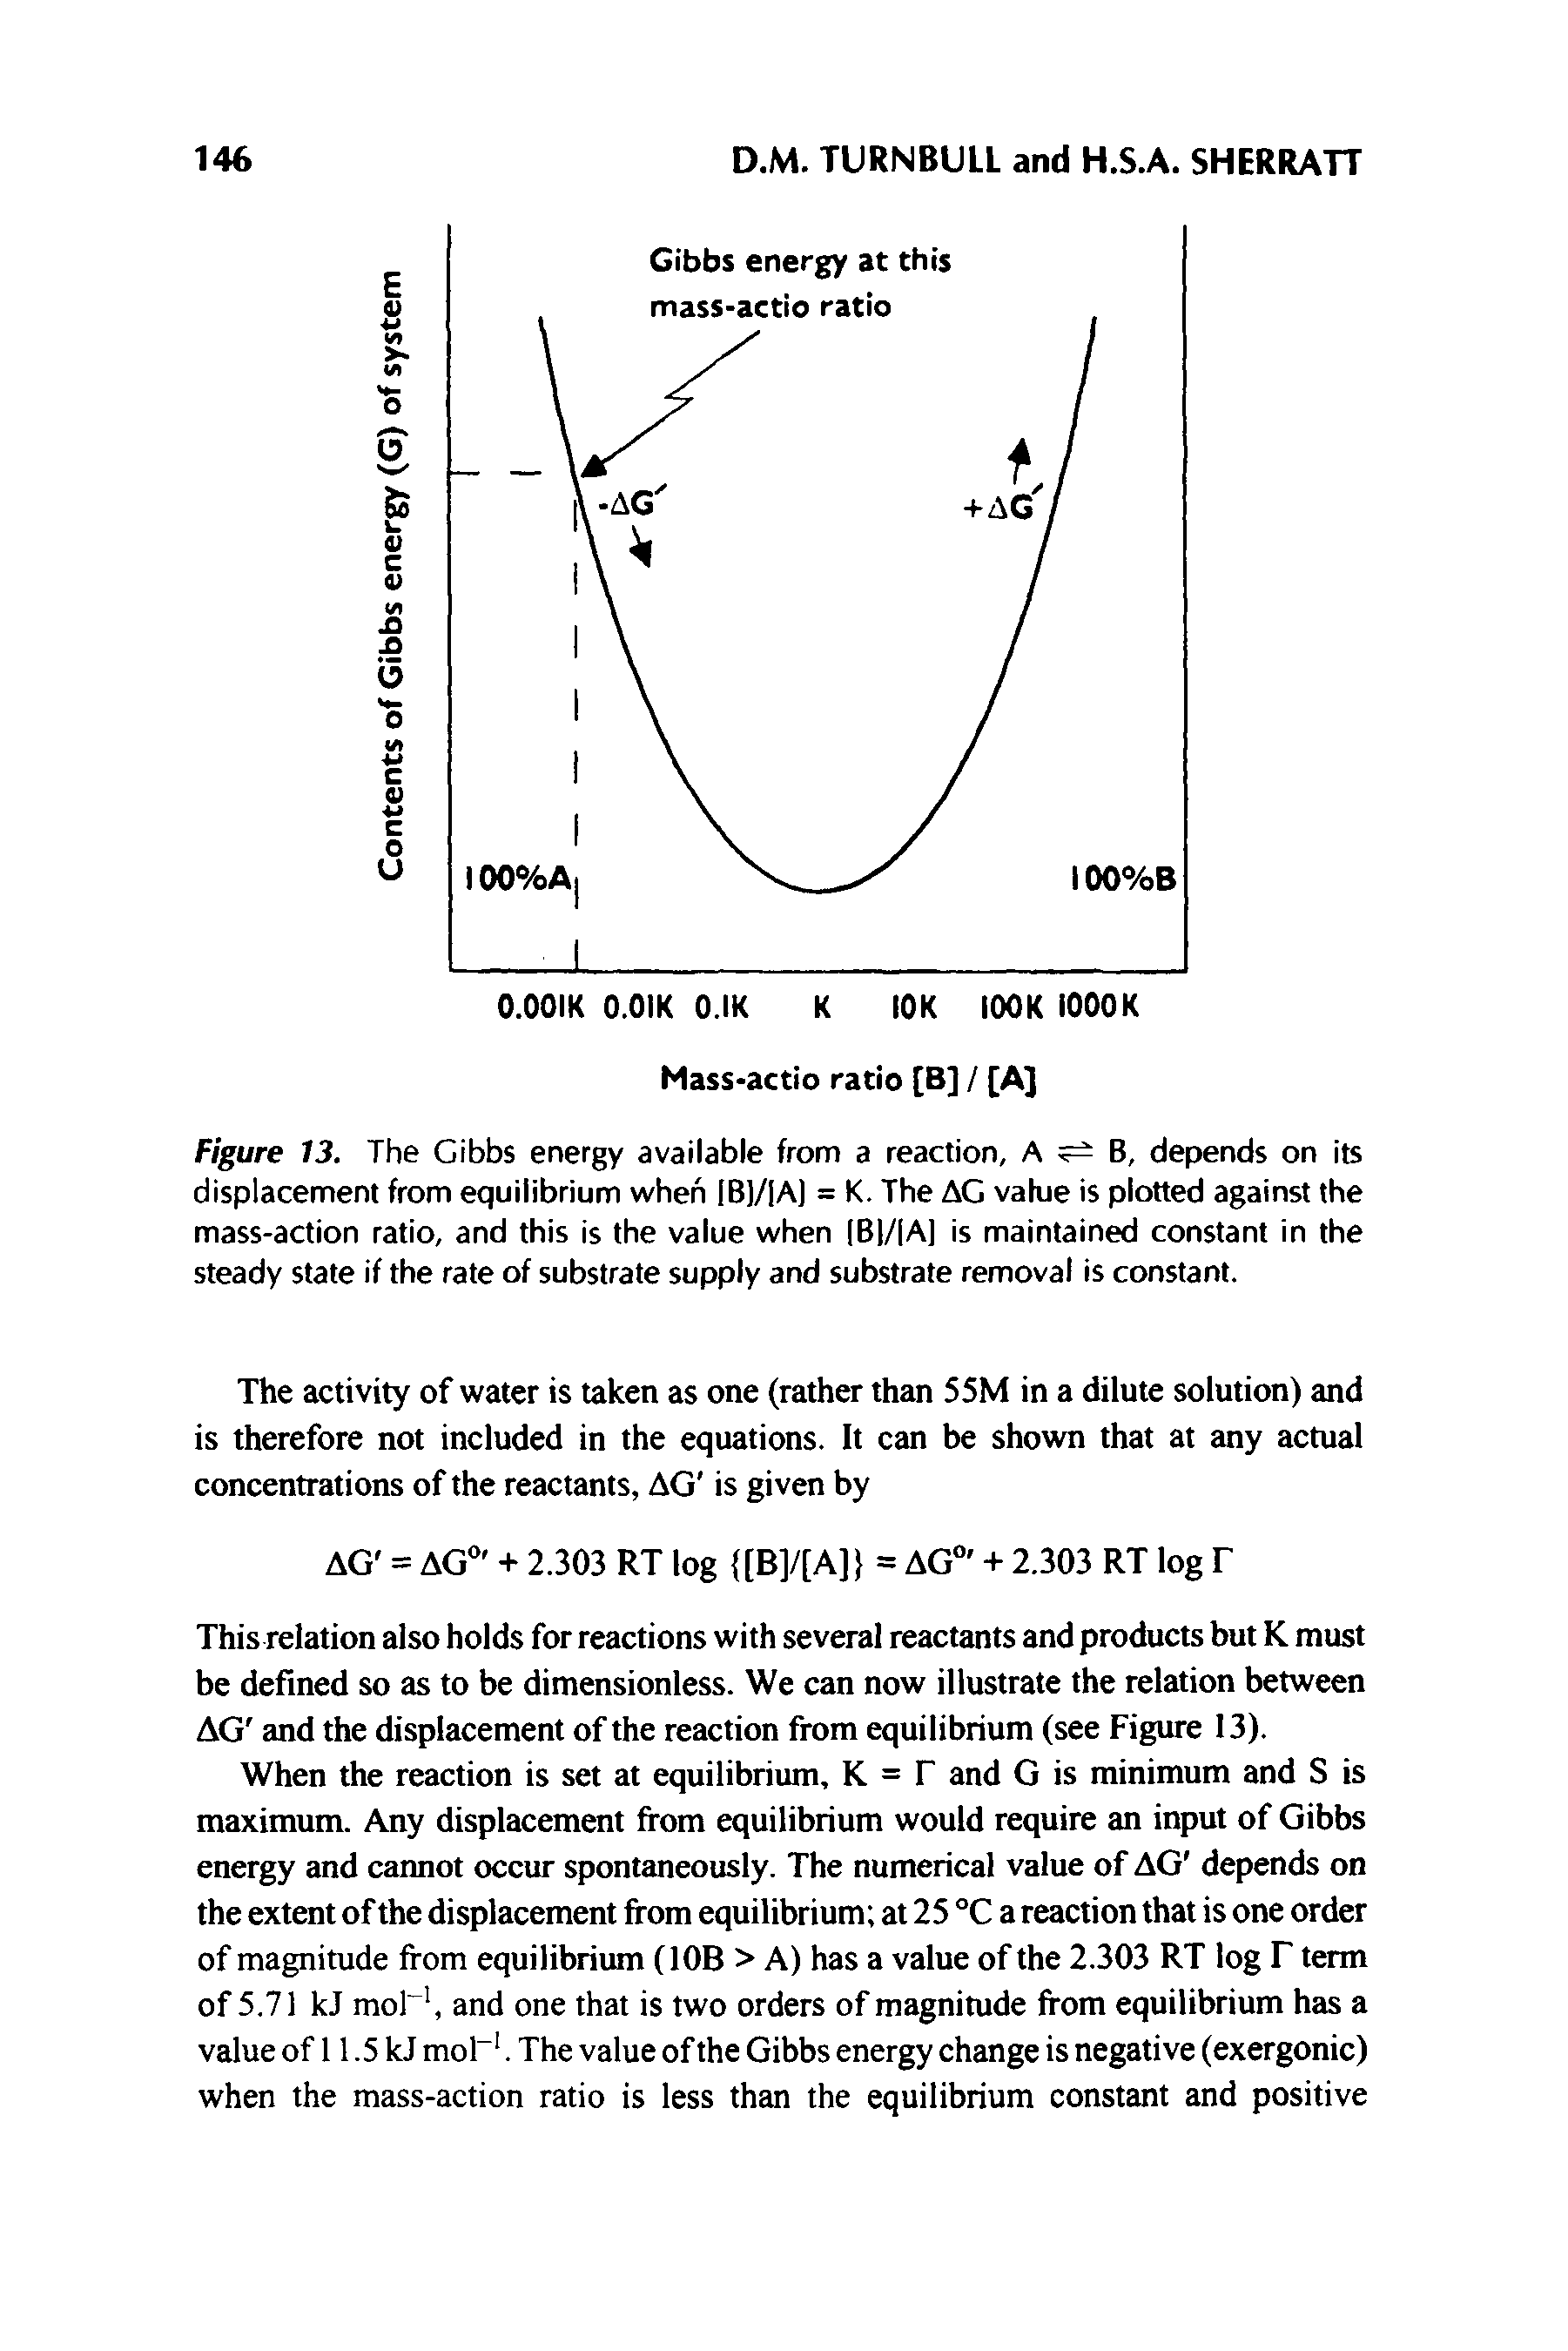 Figure 13. The Gibbs energy available from a reaction, A B, depends on its displacement from equilibrium when IB)/IA) = K. The AC value is plotted against the mass-action ratio, and this is the value when B1/ A] is maintained constant in the steady state if the rate of substrate supply and substrate removal is constant.